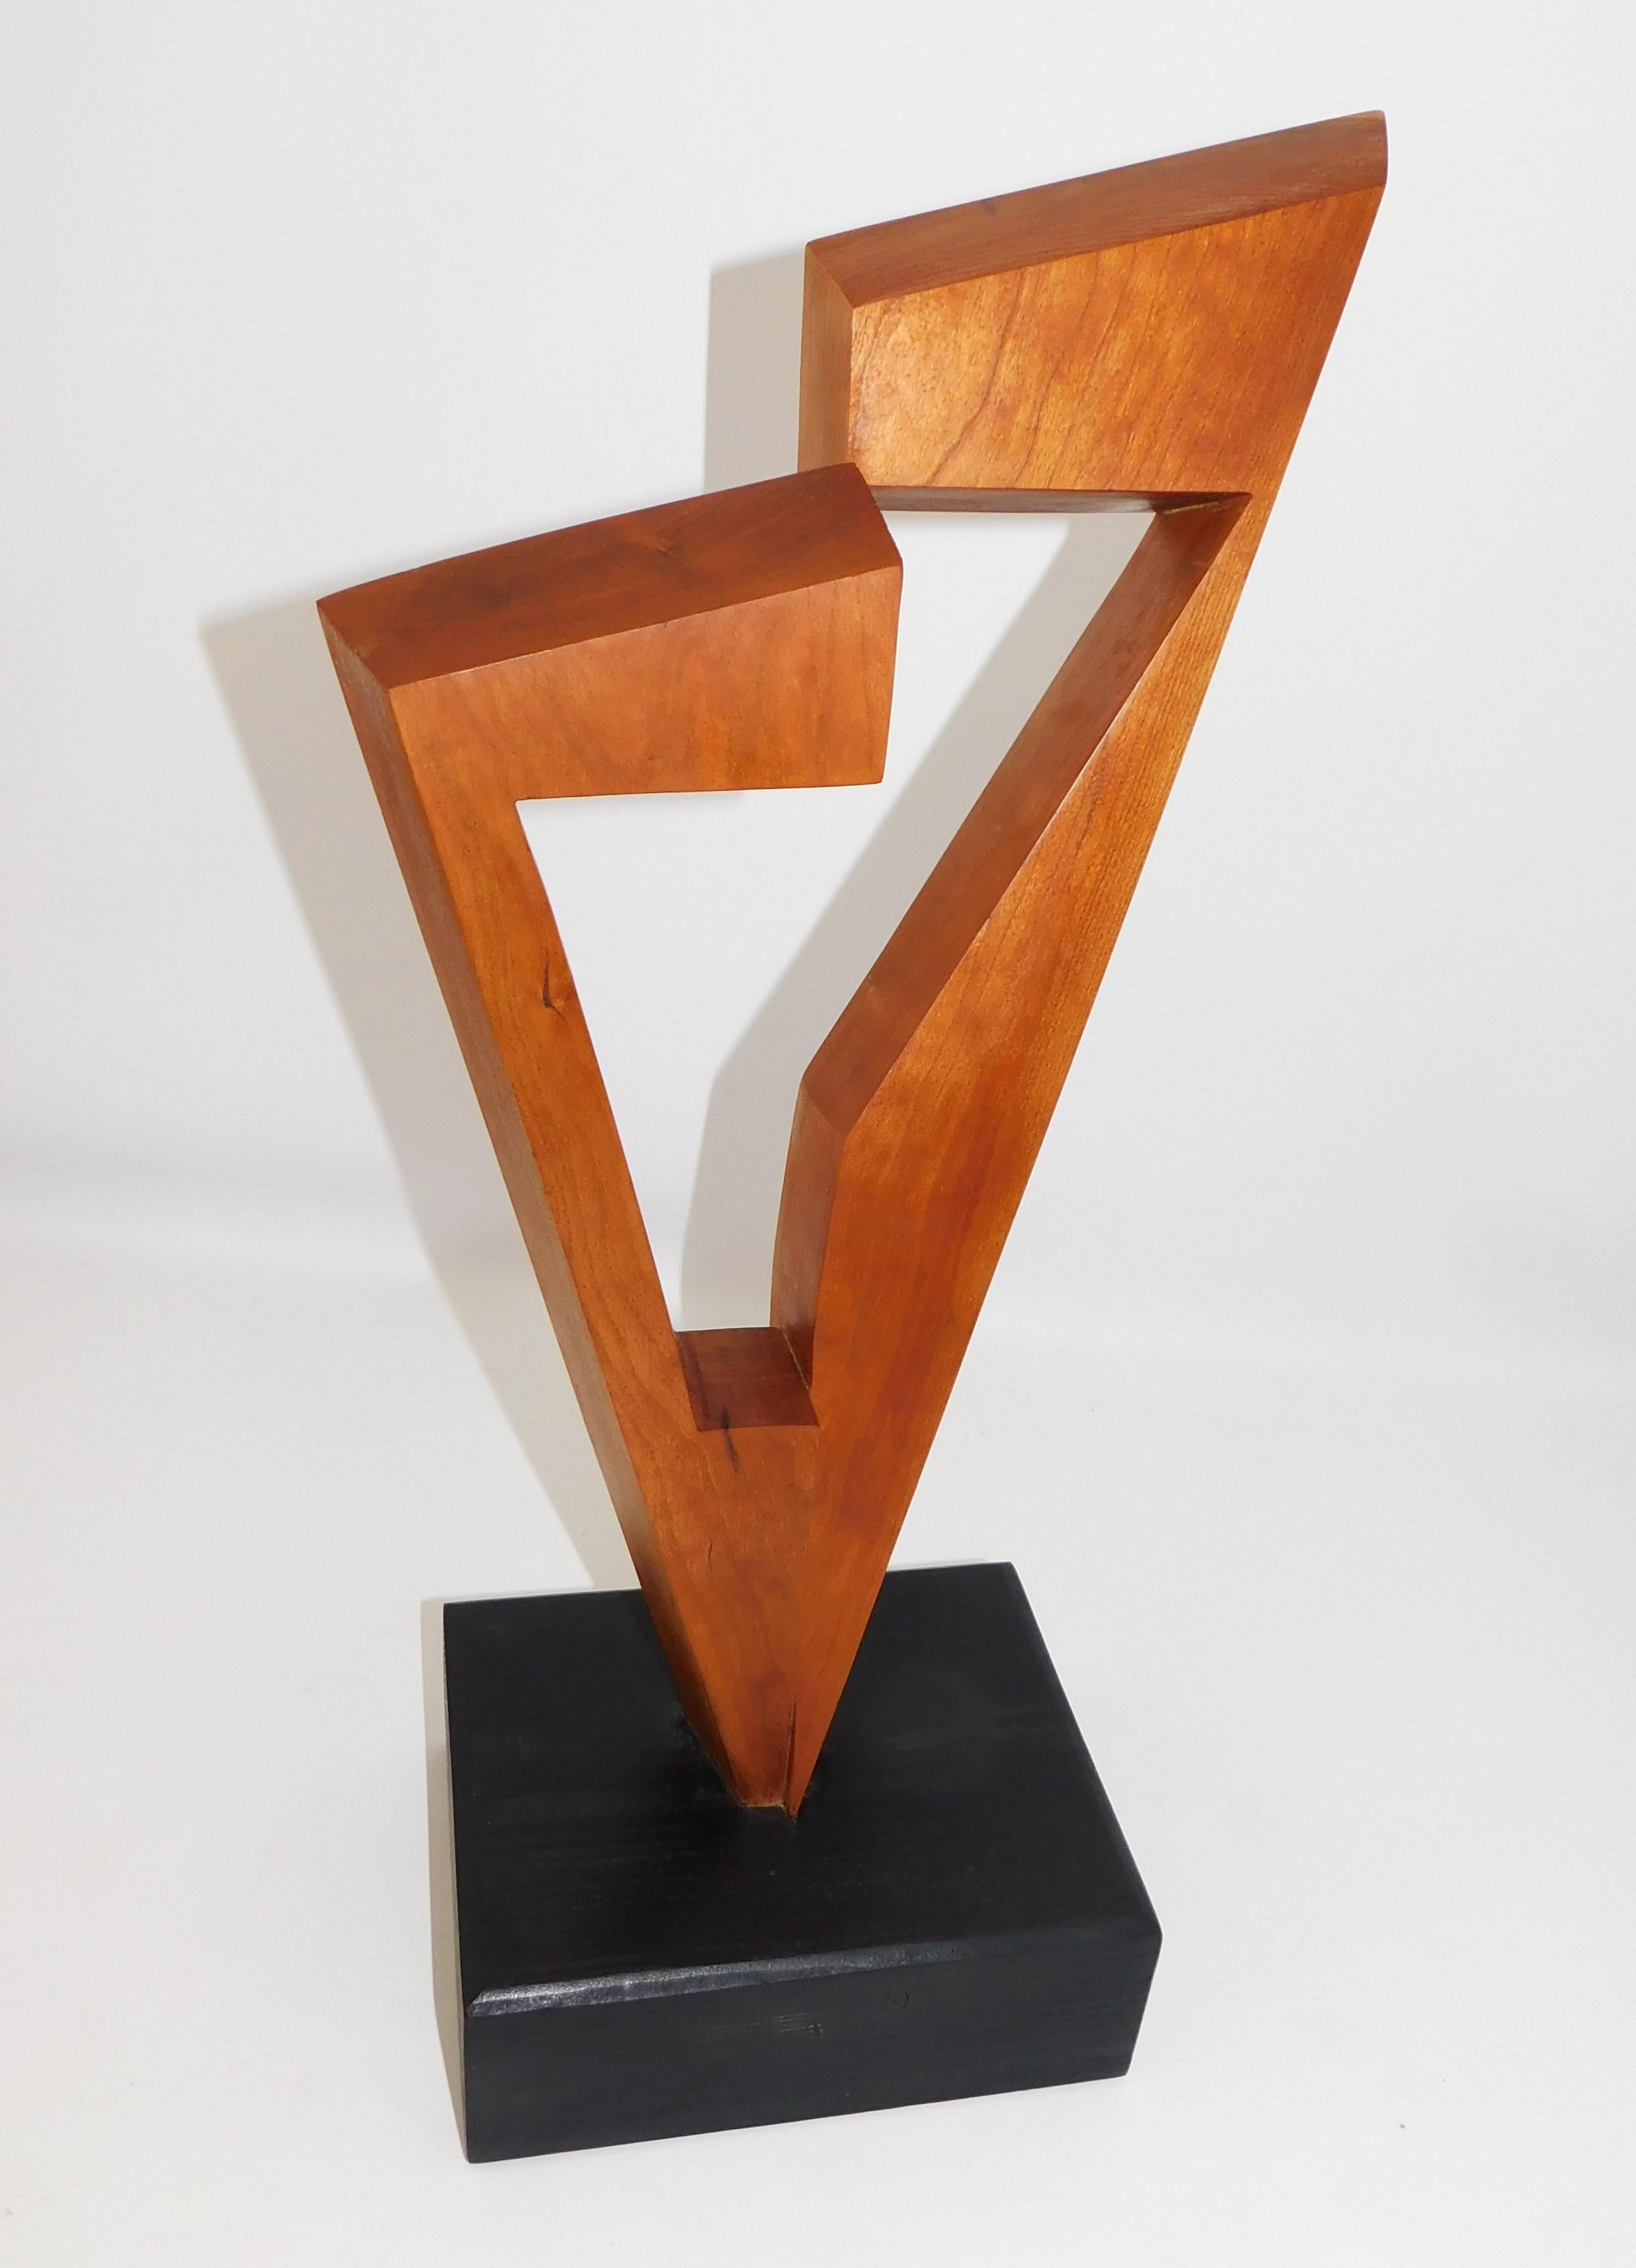 This contemporary abstract wooden sculpture was done by Czeslaw Budny a Polish-Canadian artist in the constructivist style circa 2019. This sculpture was made entirely of up-cycled, reclaimed wood from a variety of sources and utilizes the